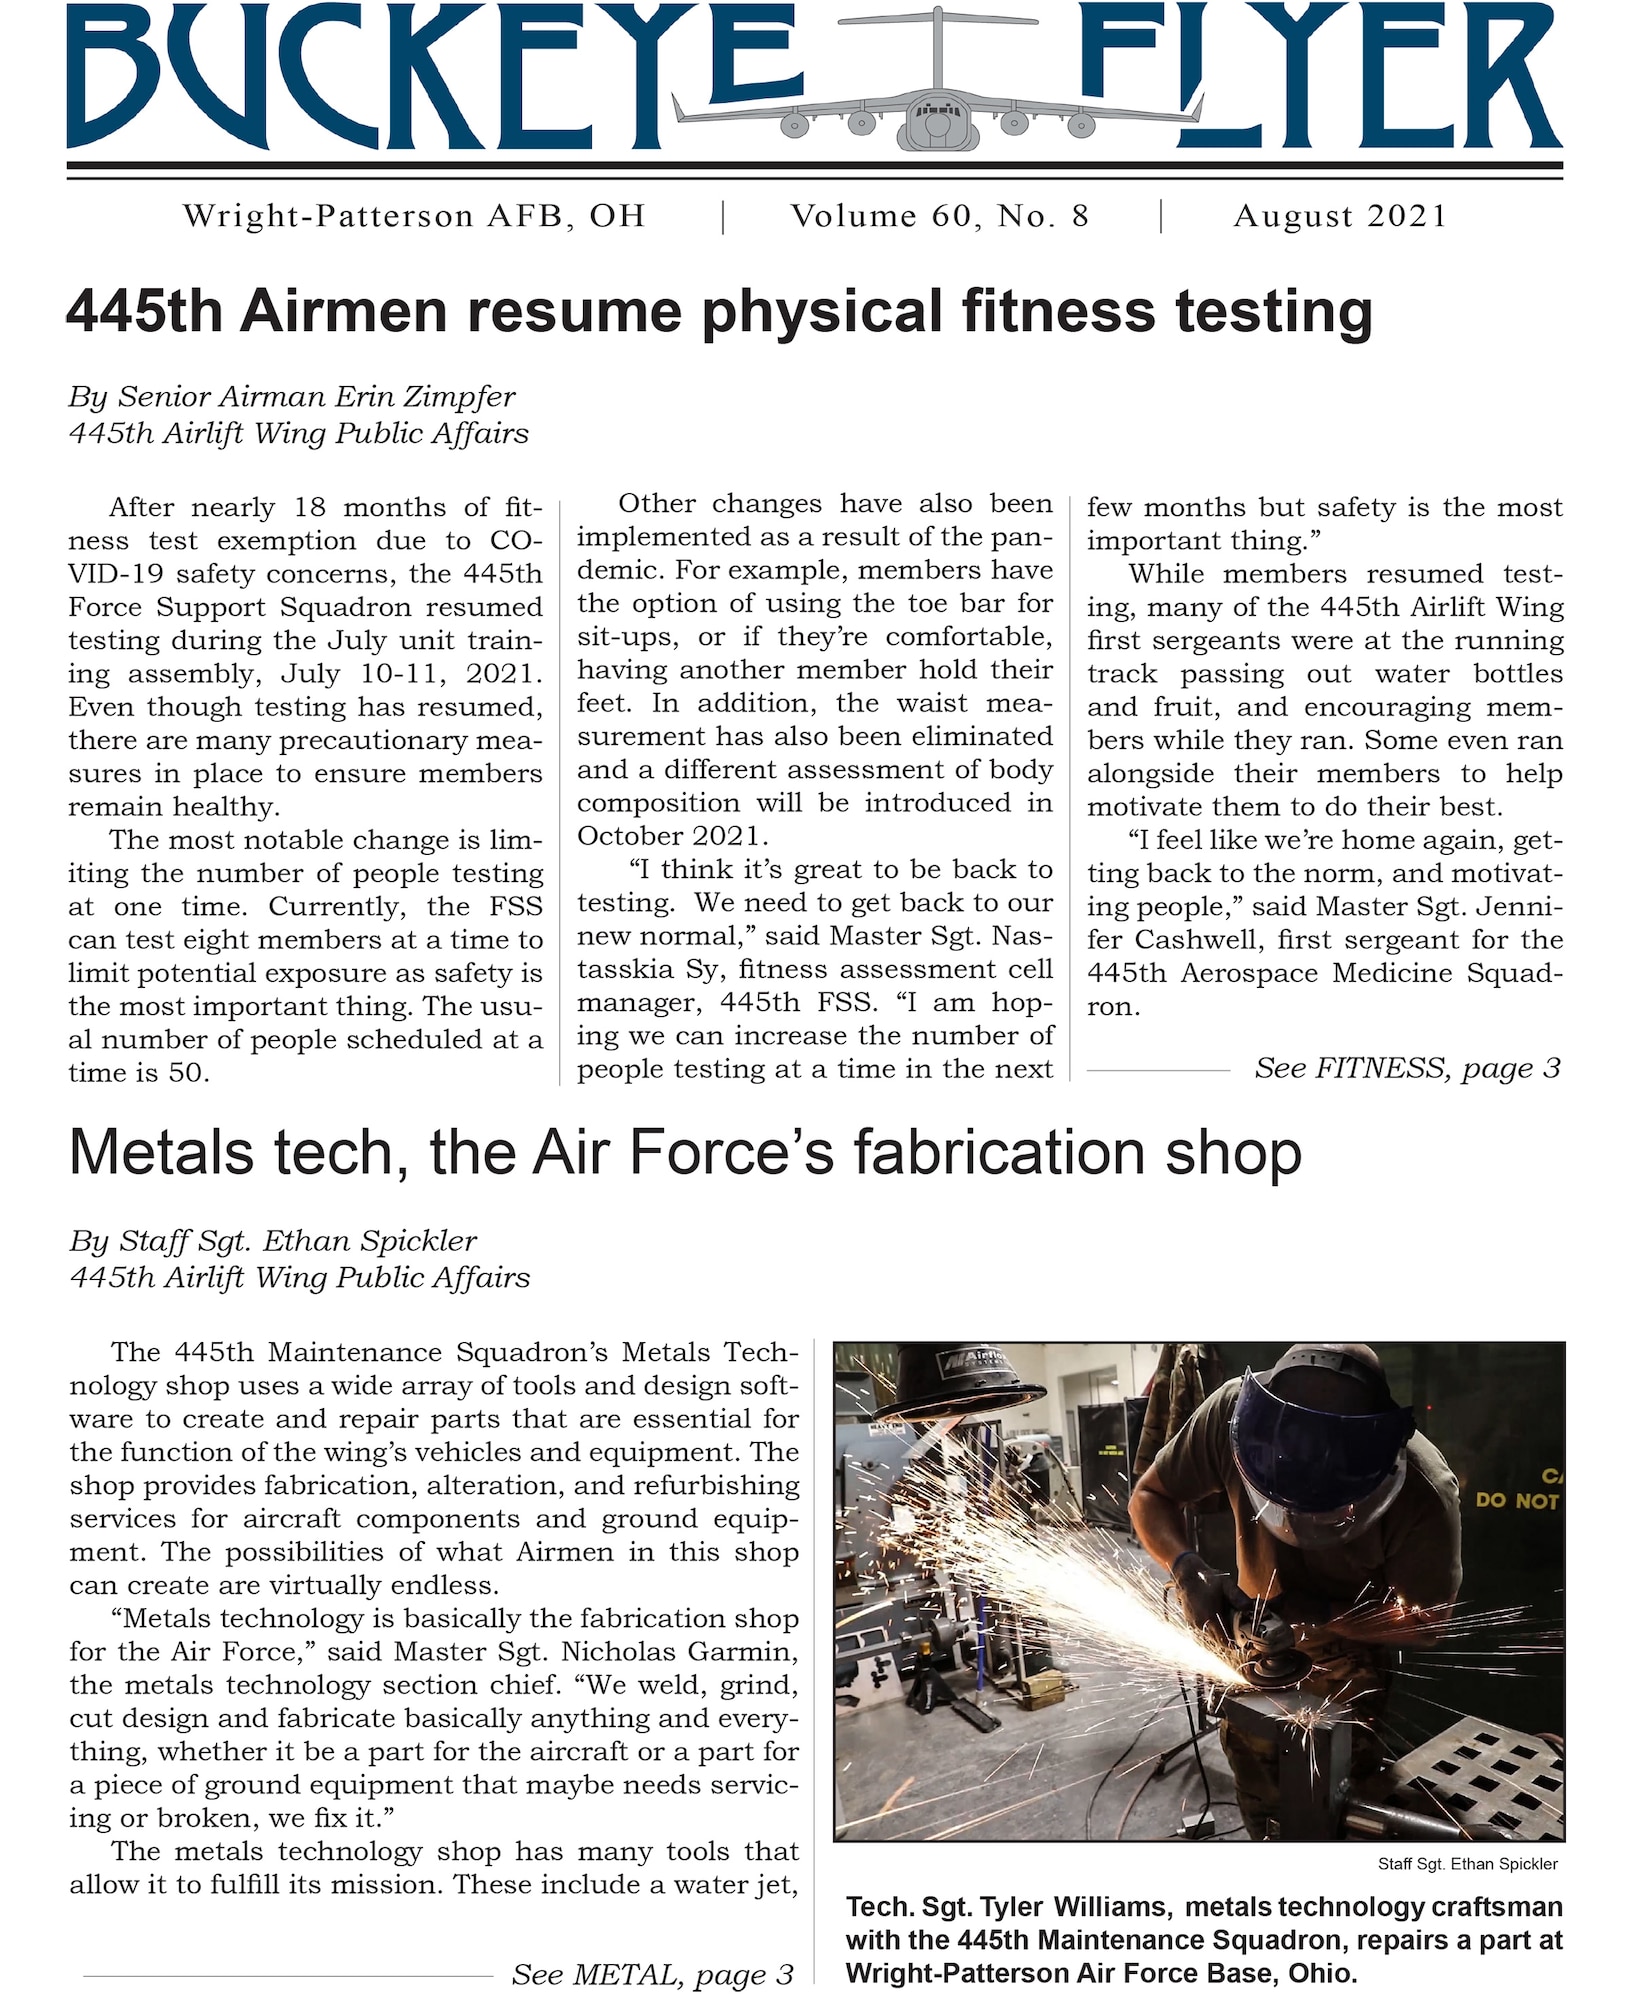 The August 2021 issue of the Buckeye Flyer is now available. The official publication of the 445th Airlift Wing includes eight pages of stories, photos and features pertaining to the 445th Airlift Wing, Air Force Reserve Command and the U.S. Air Force.